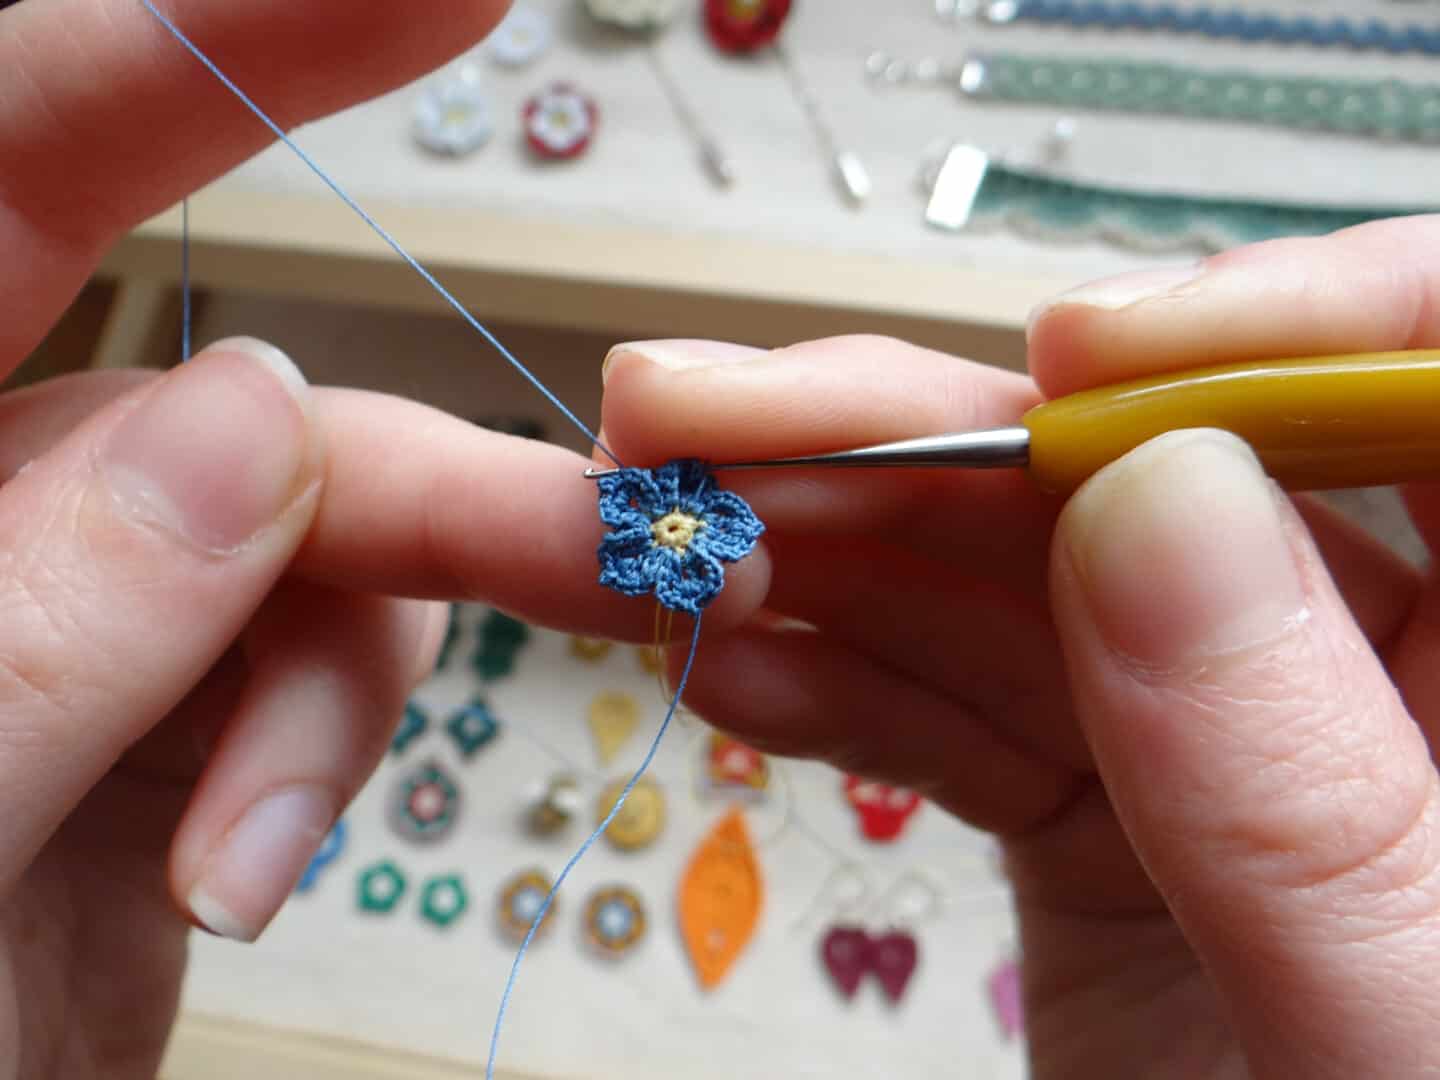 Micro Crochet: 10 tips for making a perfect tiny crochet flower